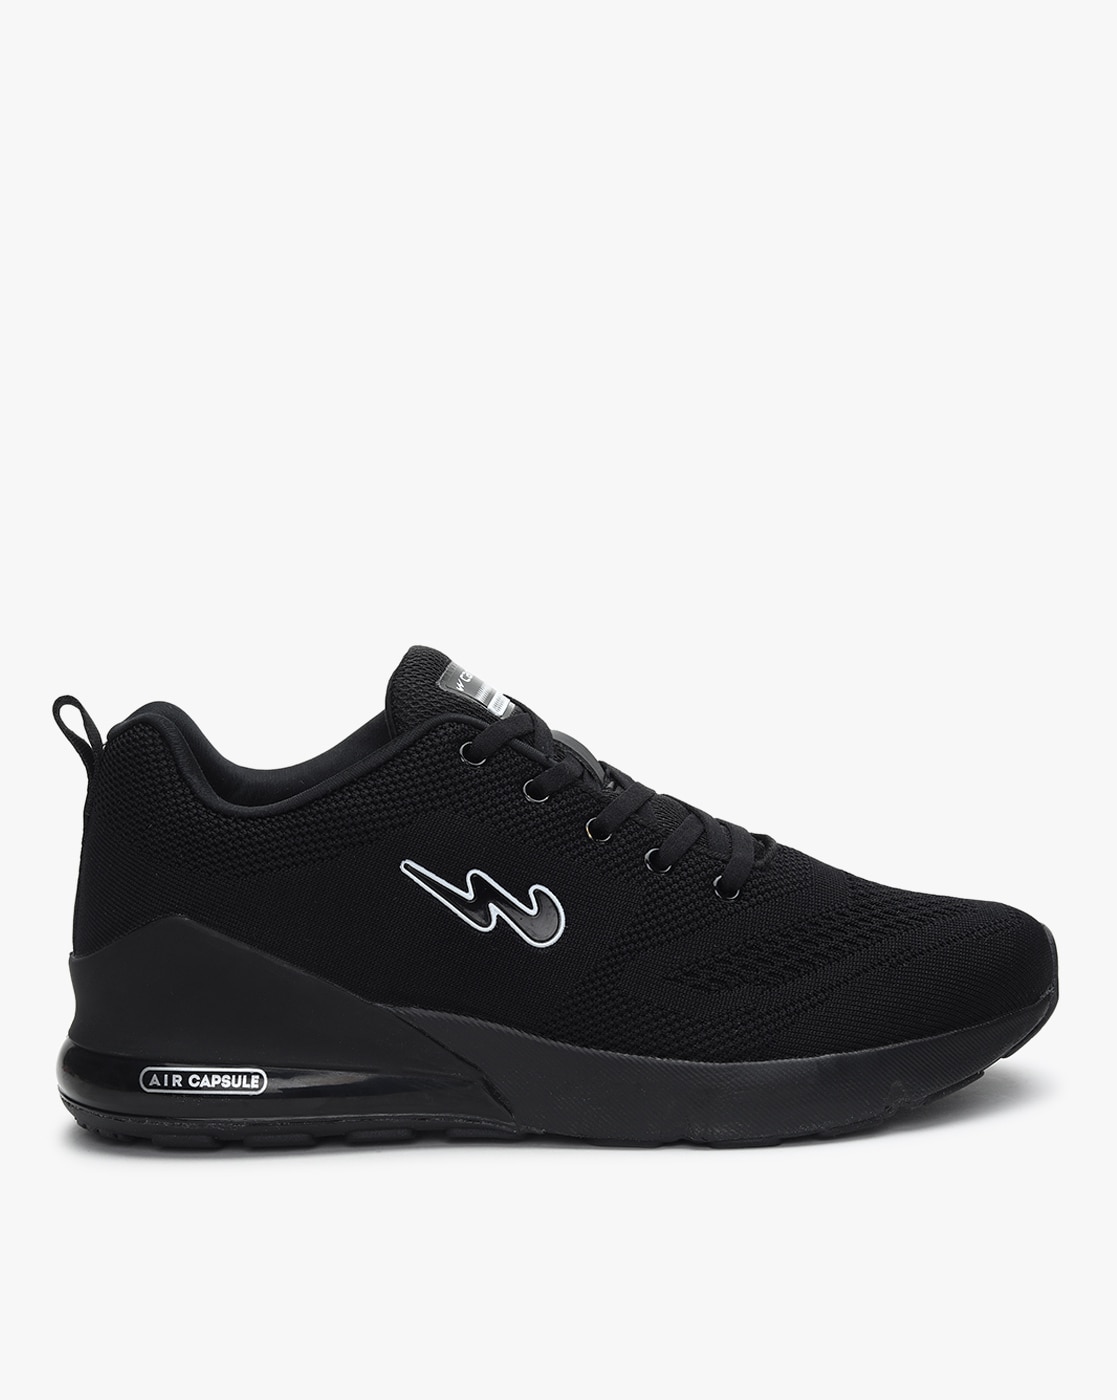 Buy Black Sports Shoes for Men by Campus Online 